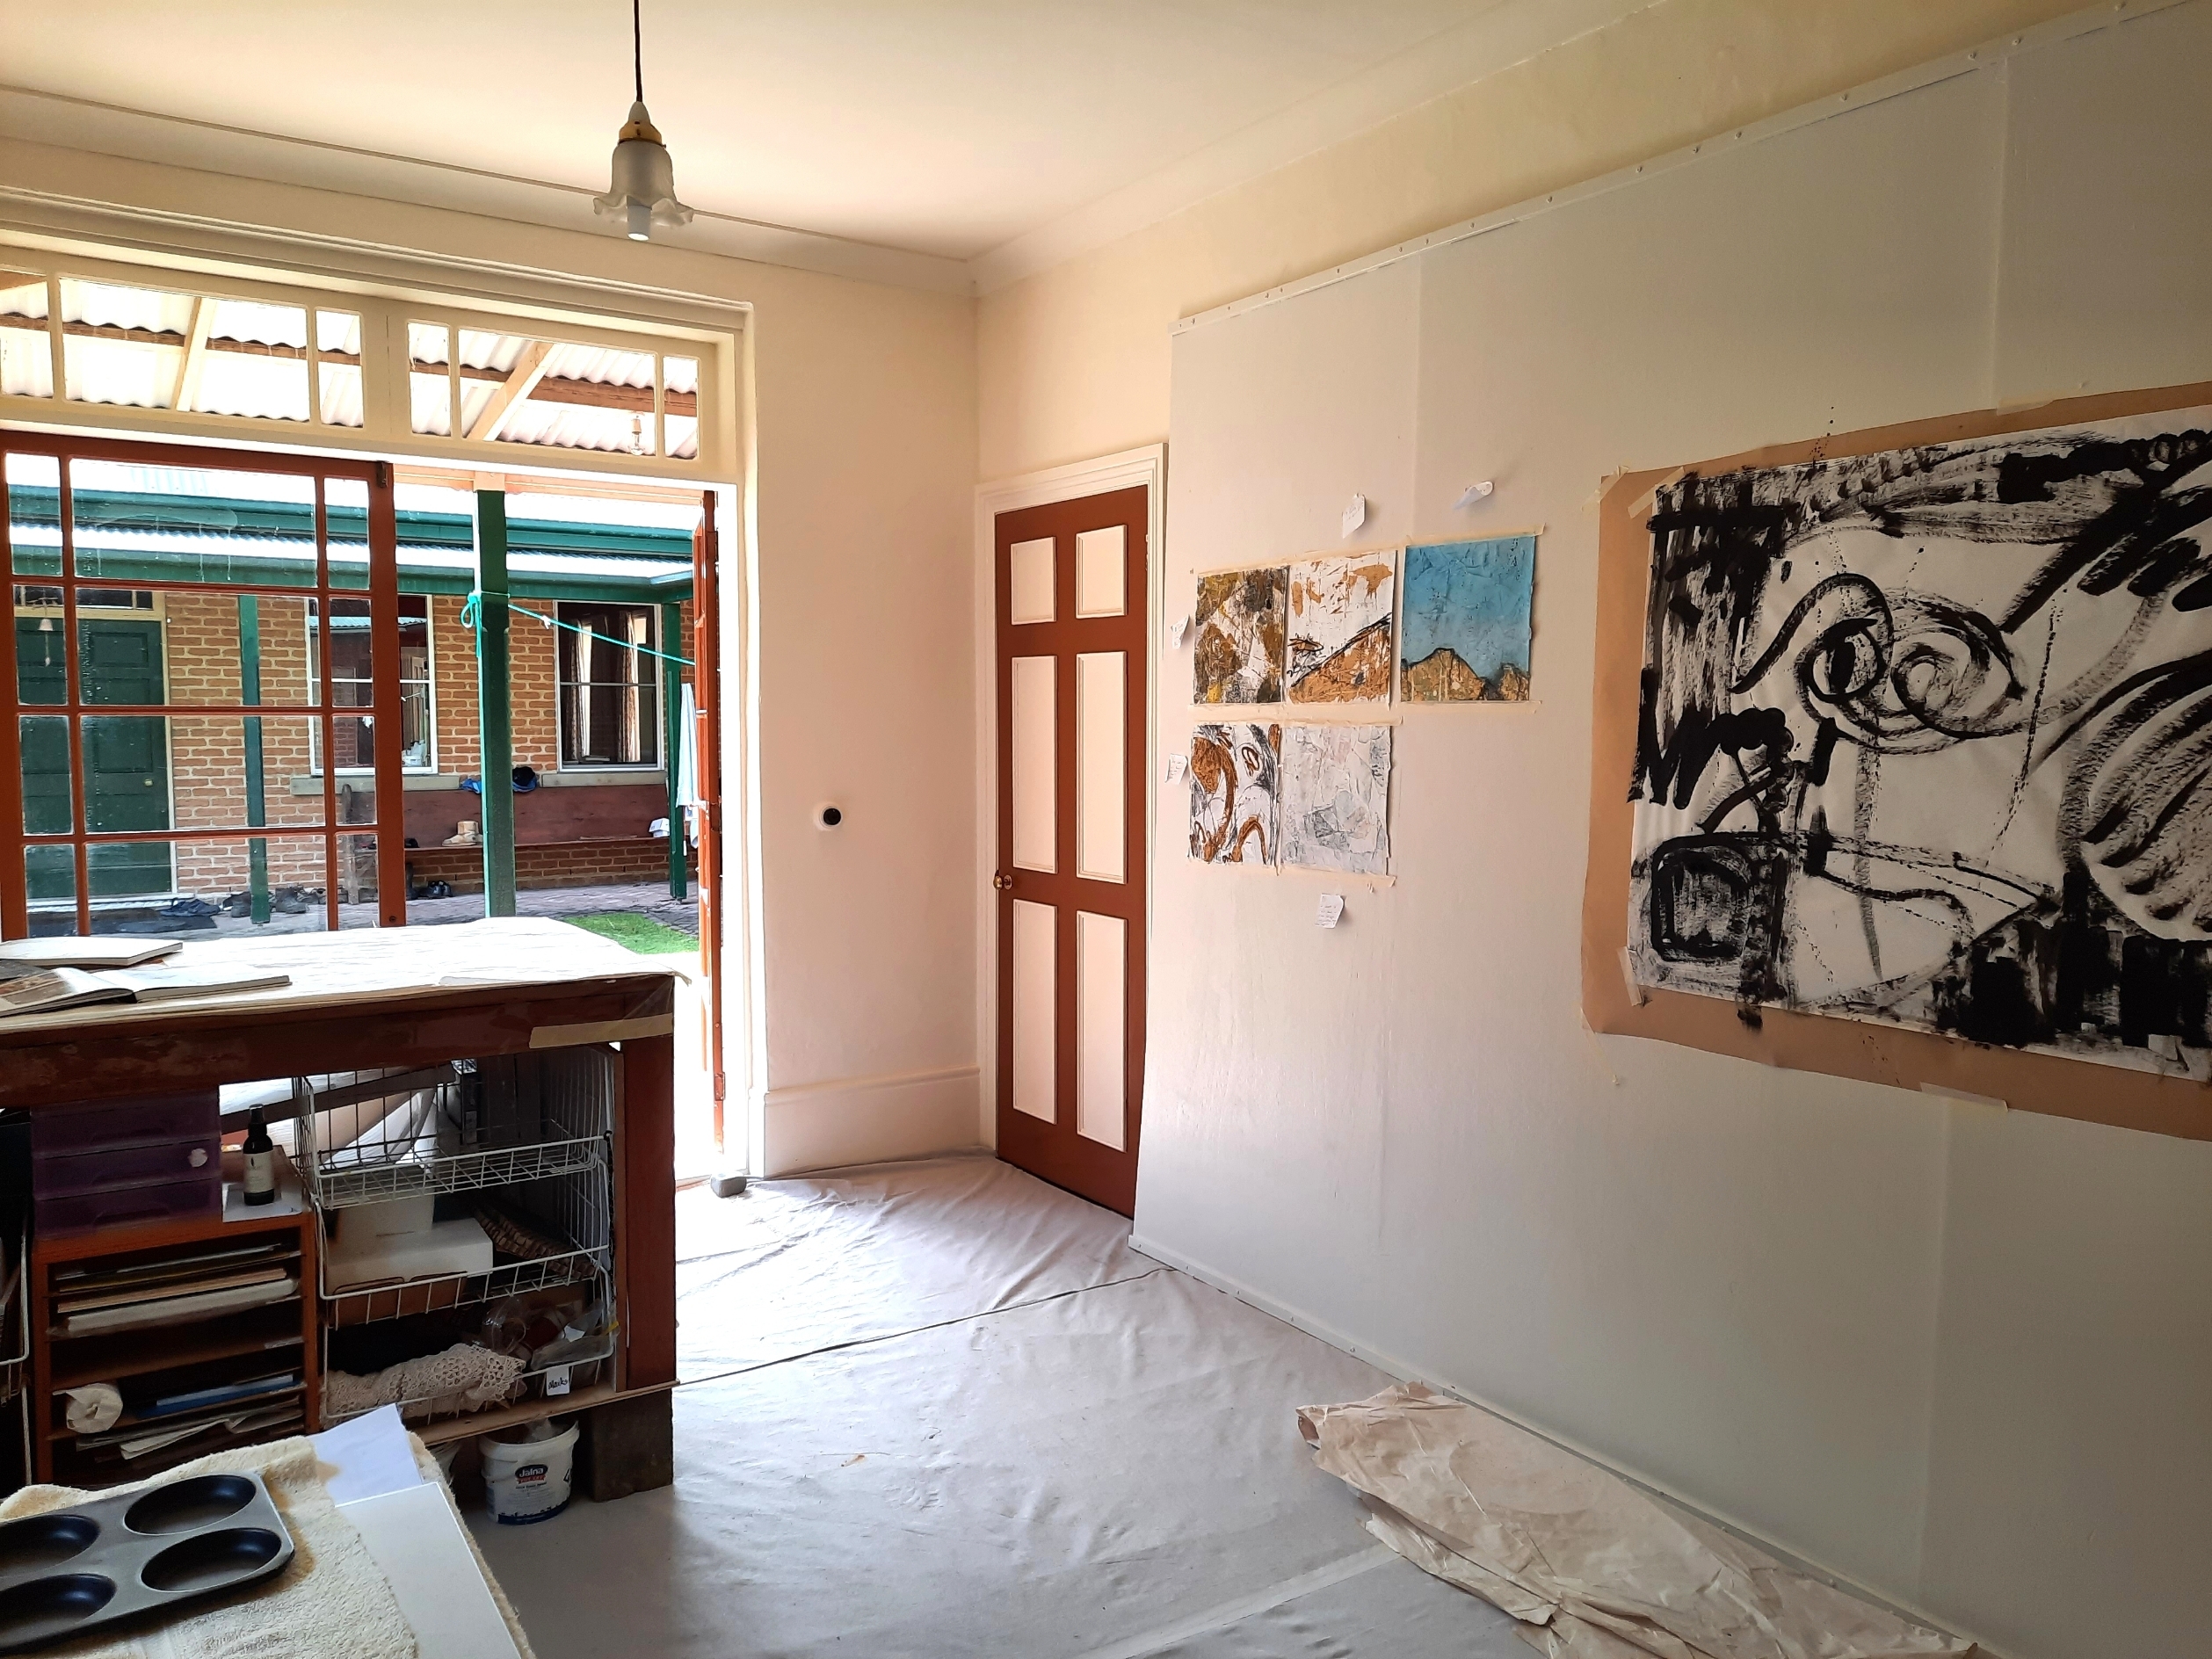 Studio space for Wendy Galloway in her behind the scenes view in her Artist Profile story